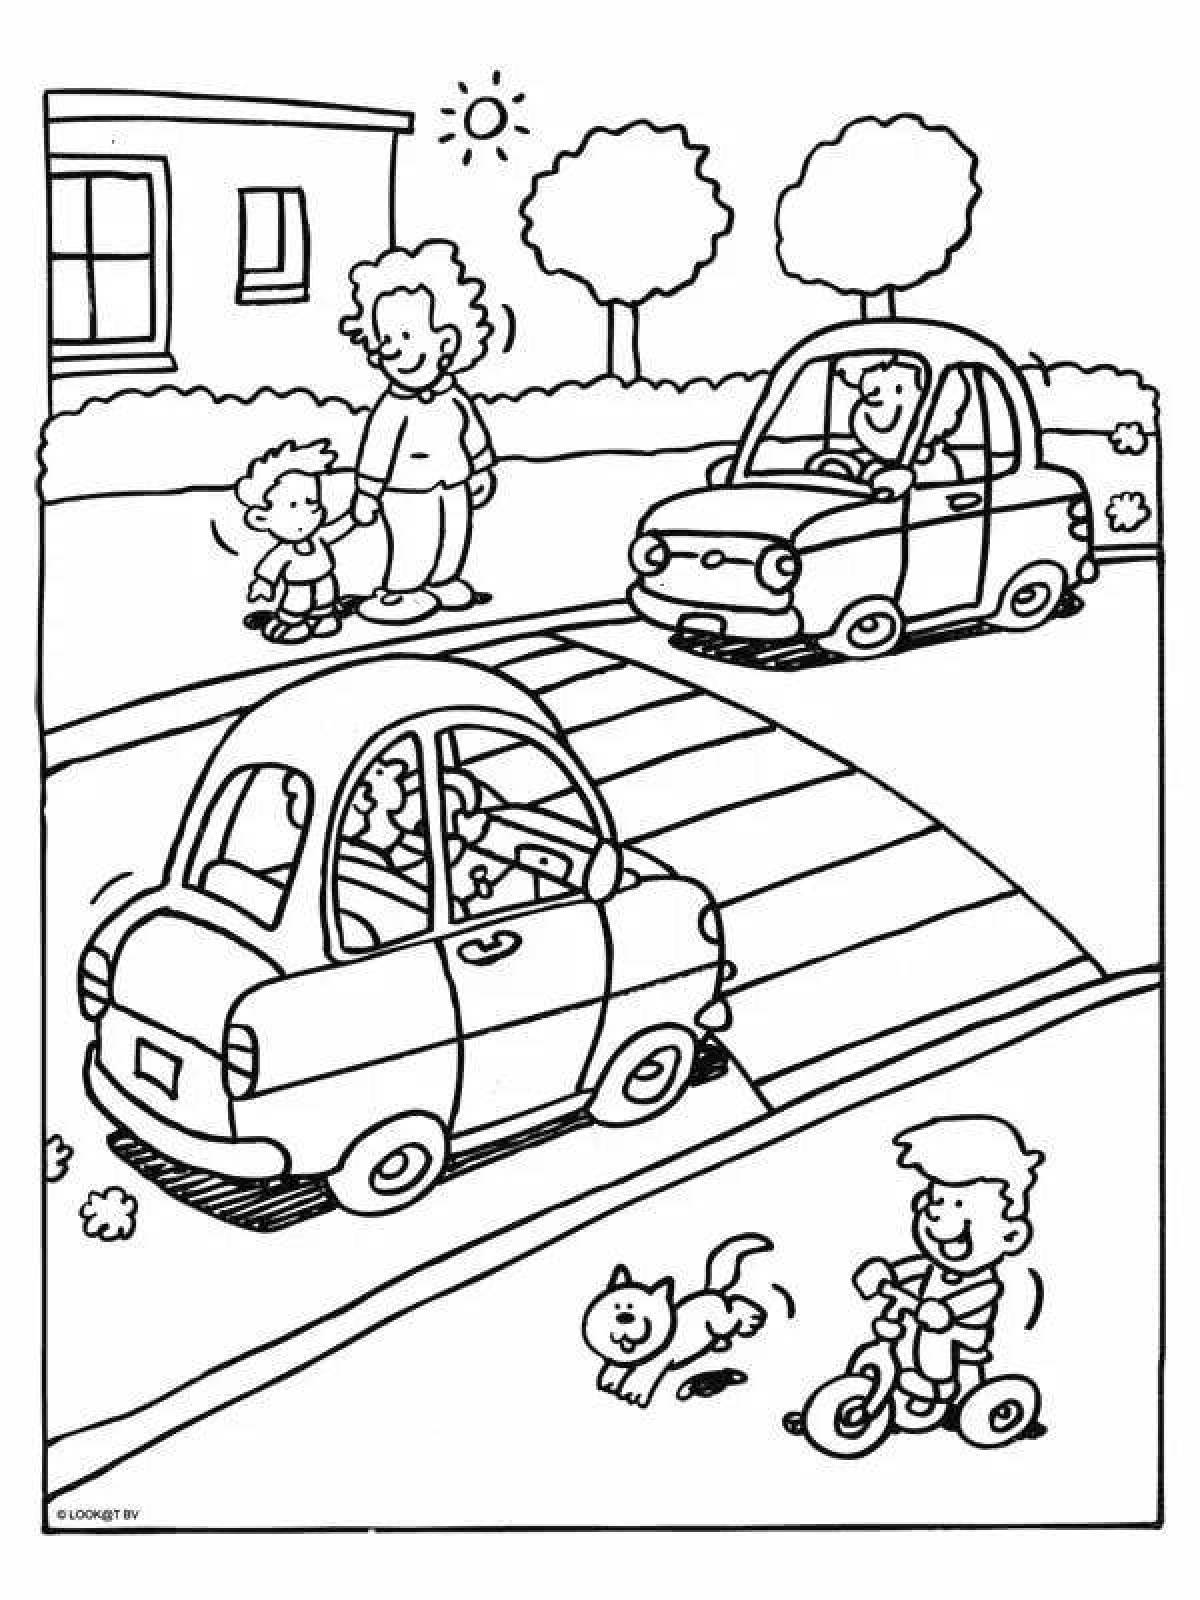 Creative rules of the road coloring for kindergarten